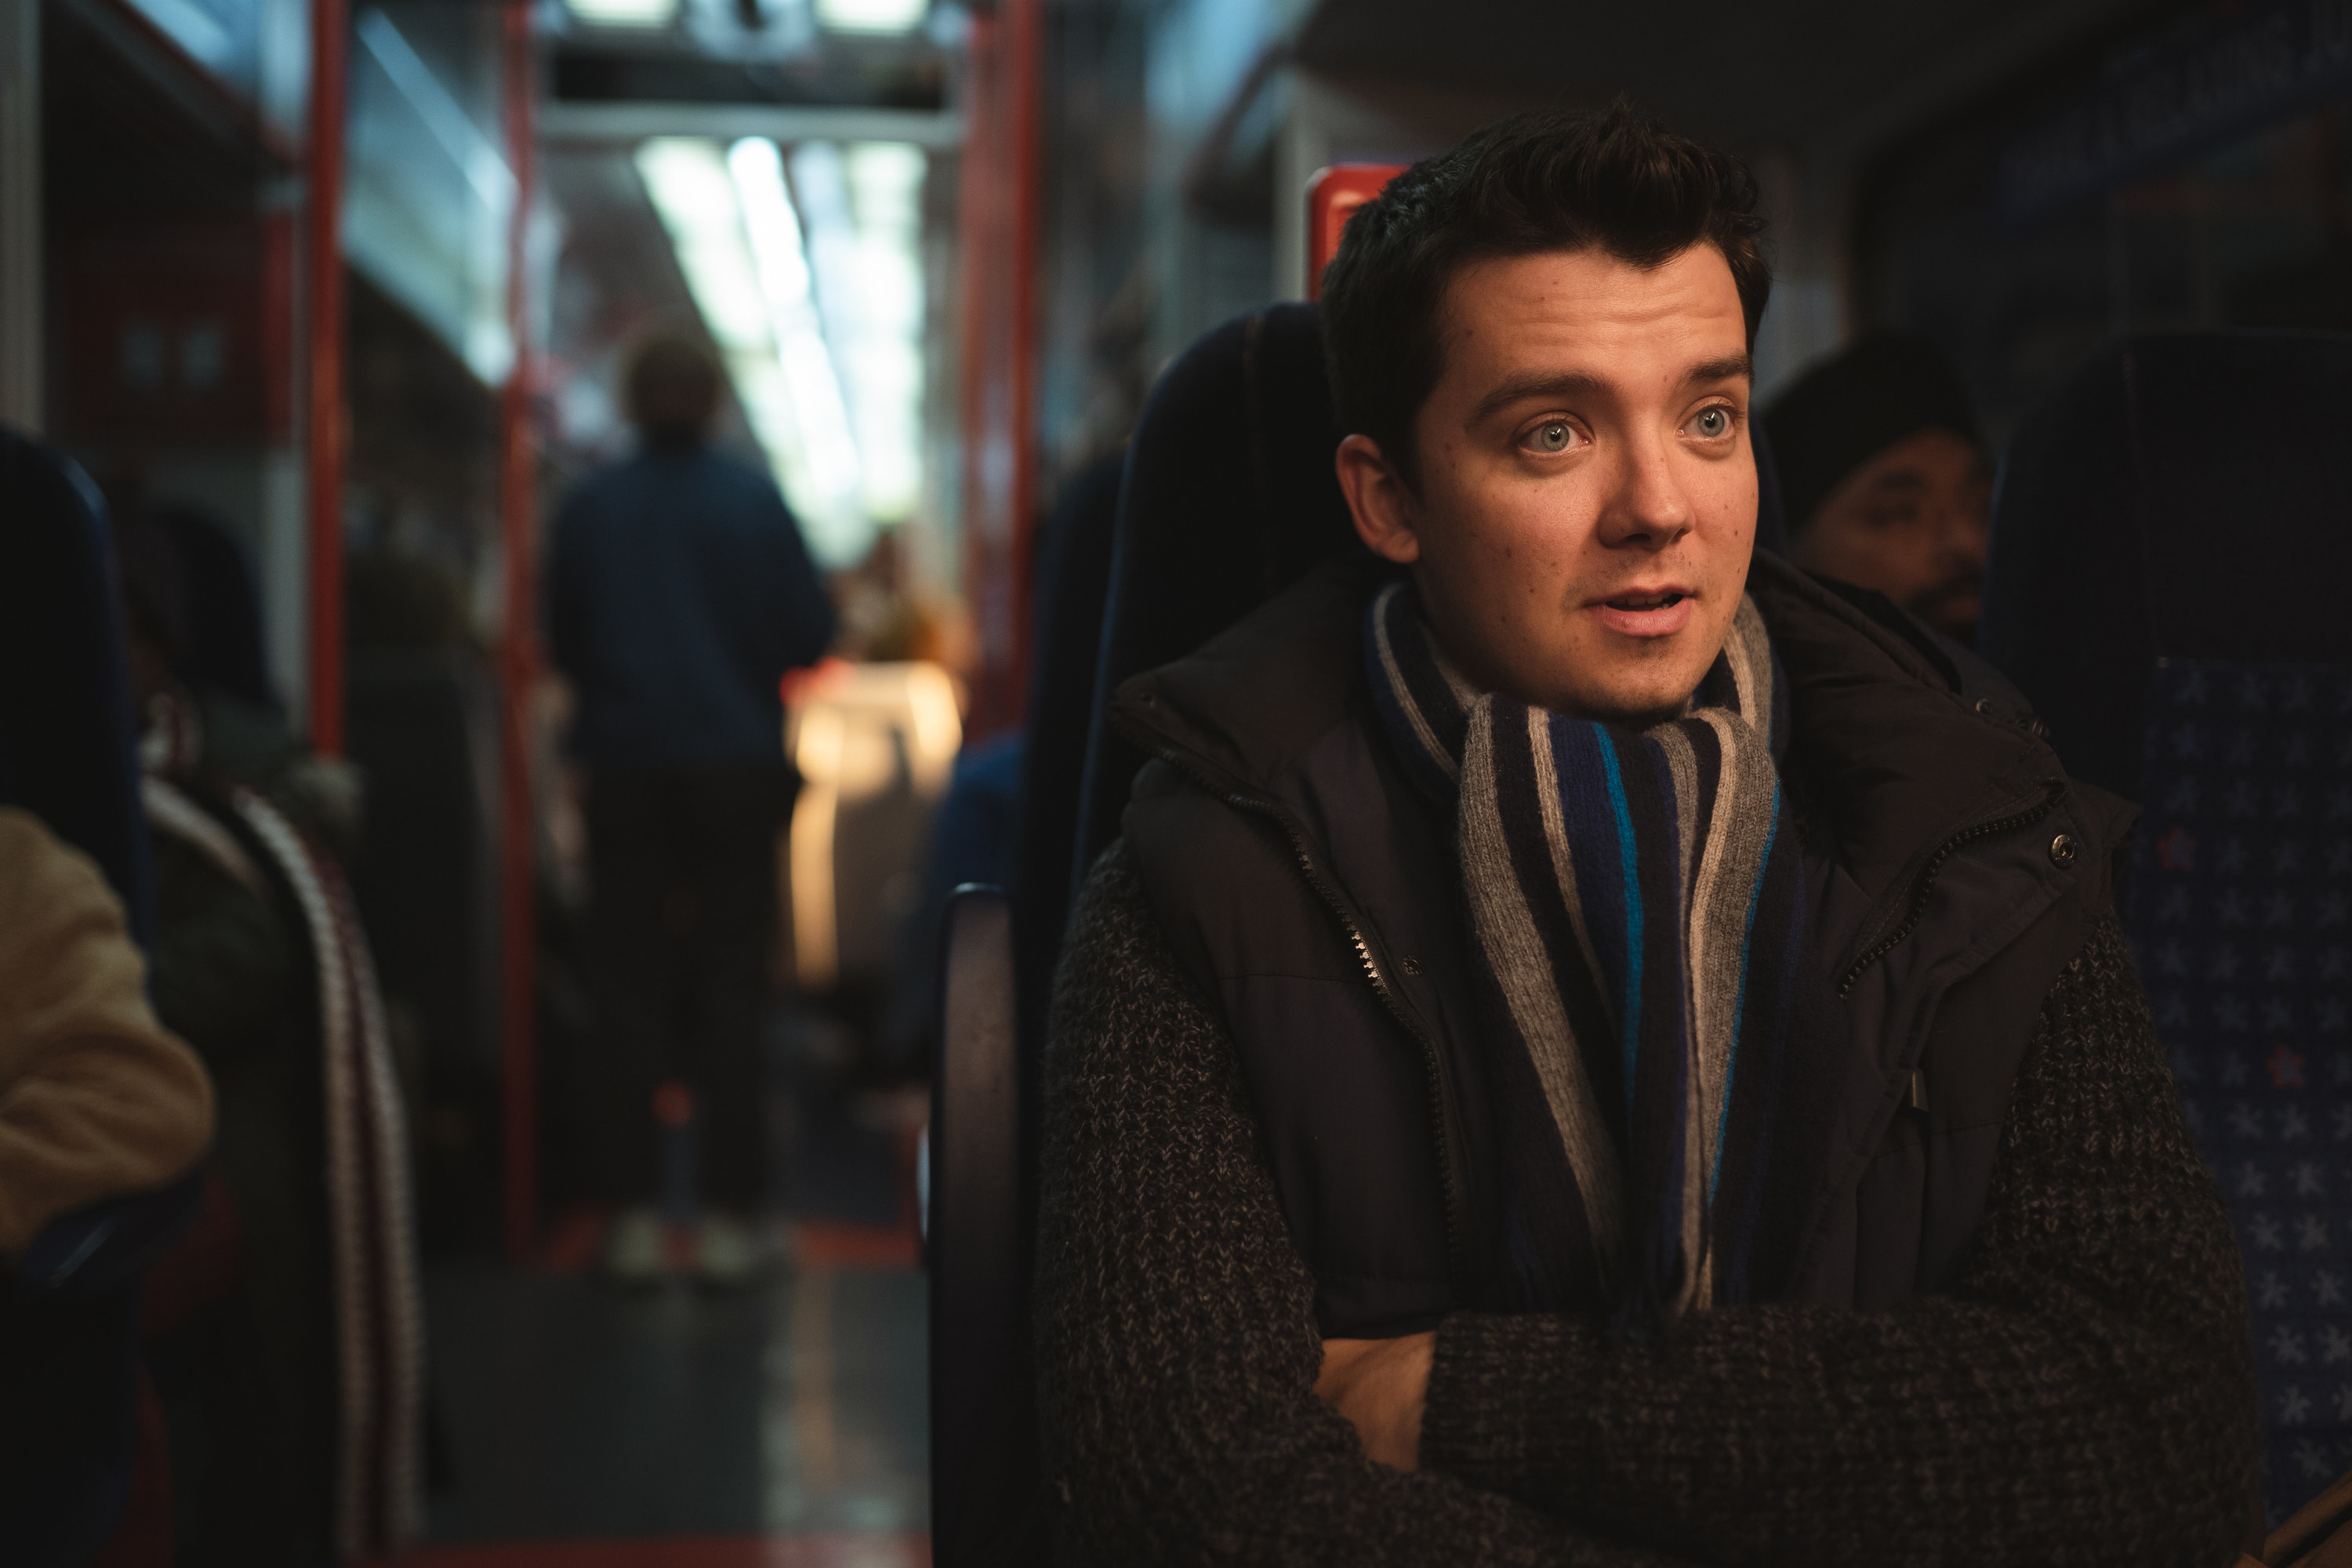 Asa Butterfield sits on a train